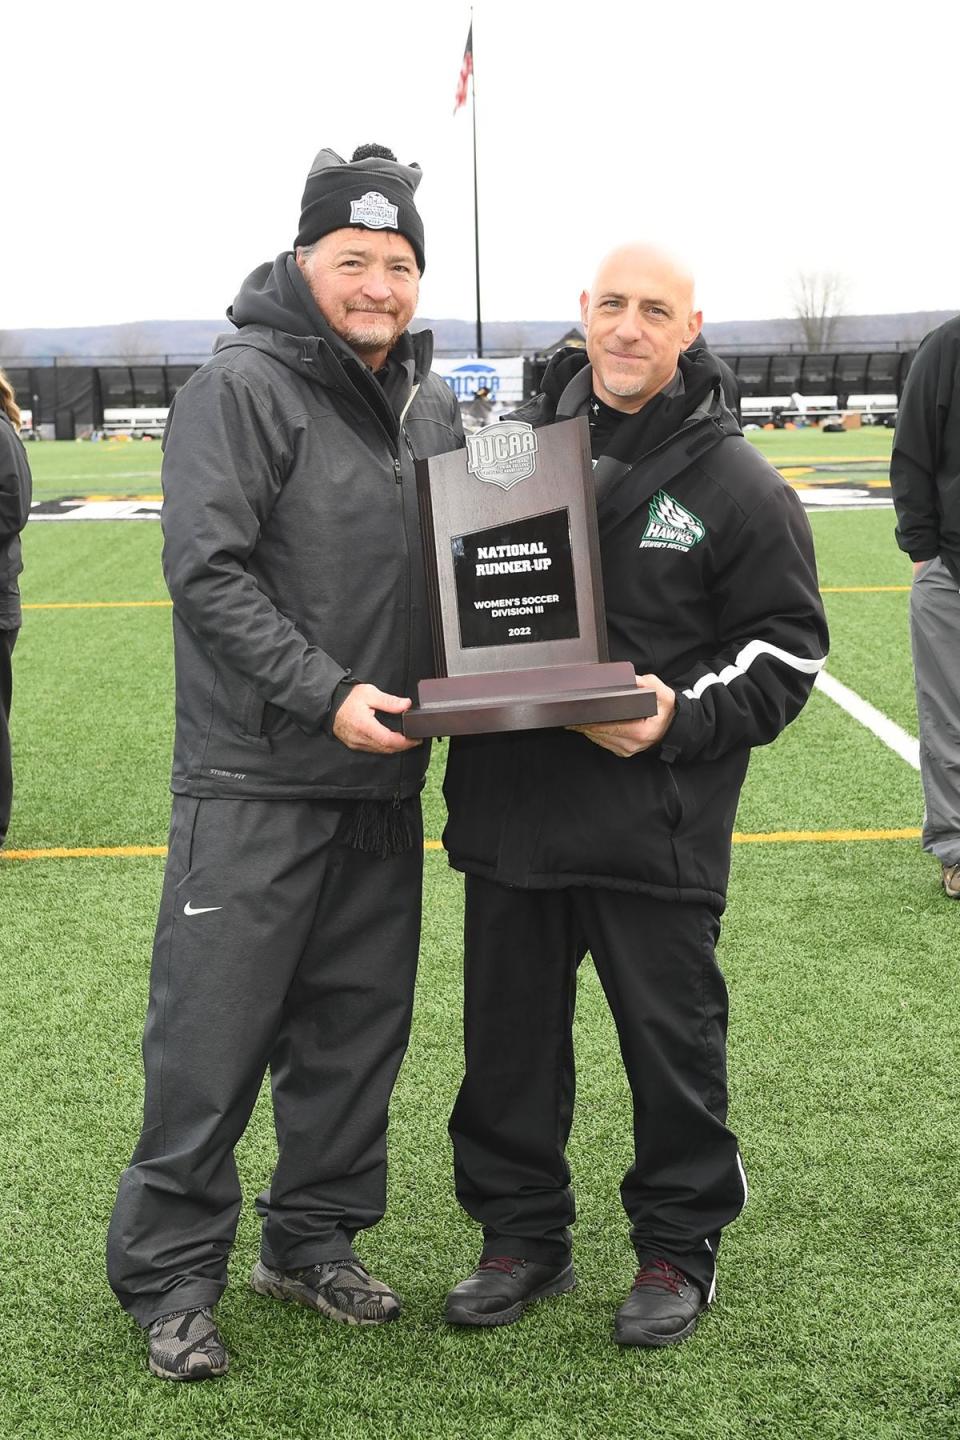 Herkimer College director of athletics Don Dutcher presents the runner-up trophy to Mohawk Valley Community College coach Jim Vitale Sunday at the NJCAA's Division III women's soccer championship match at Wehrum Stadium.